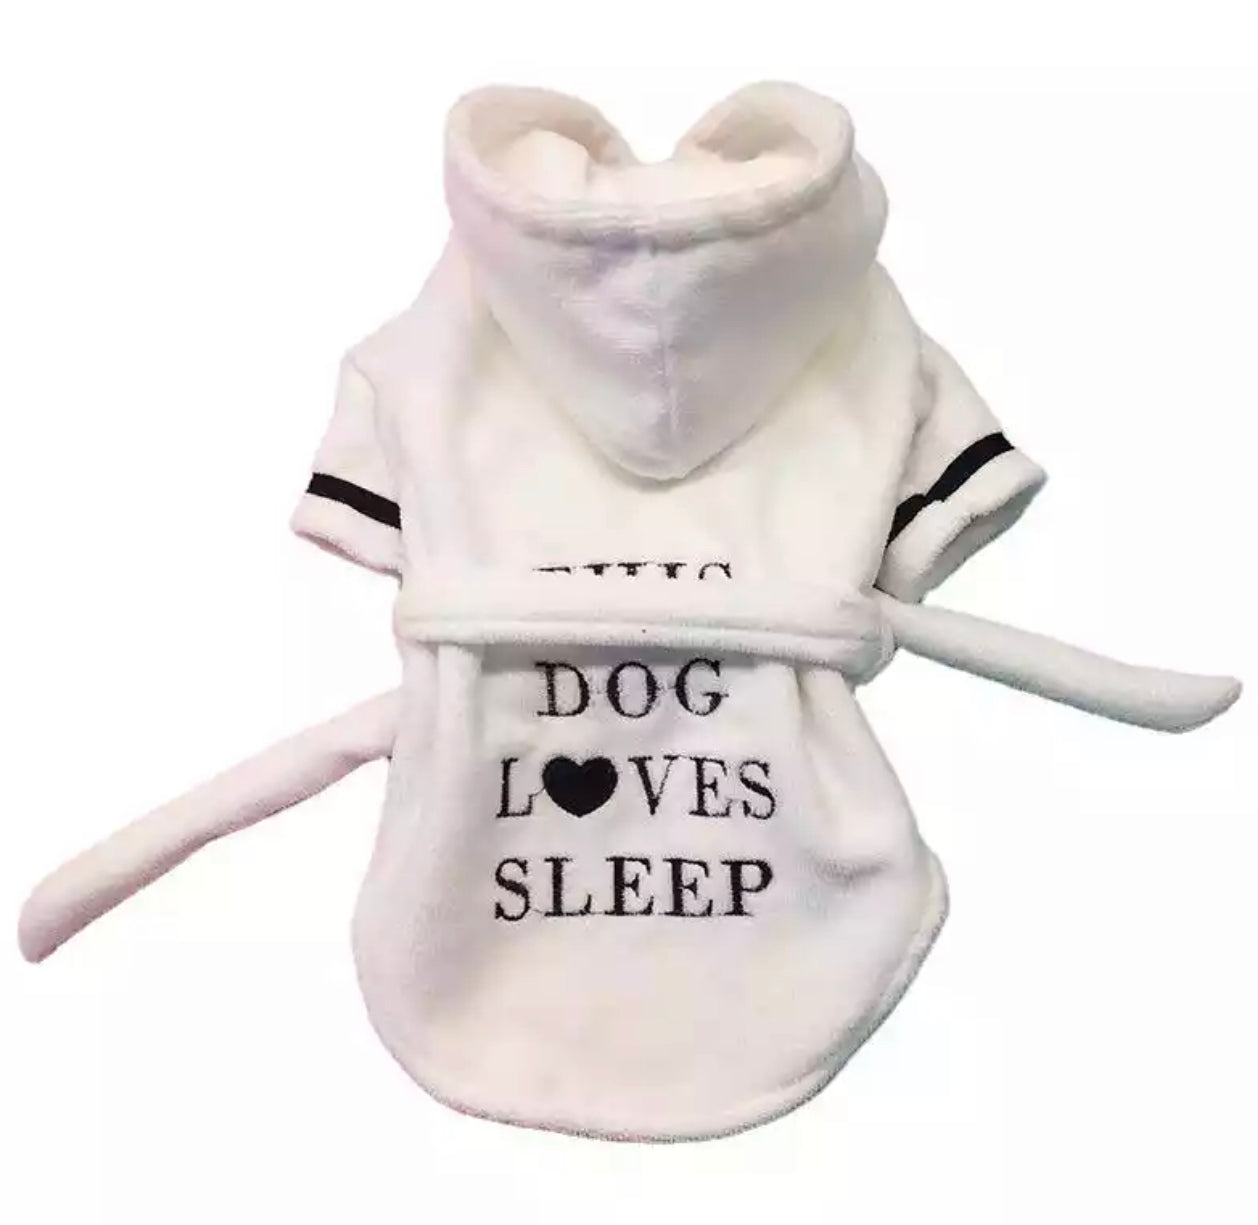 This Dog Loves Sleep Towelling Dressing Gown - White